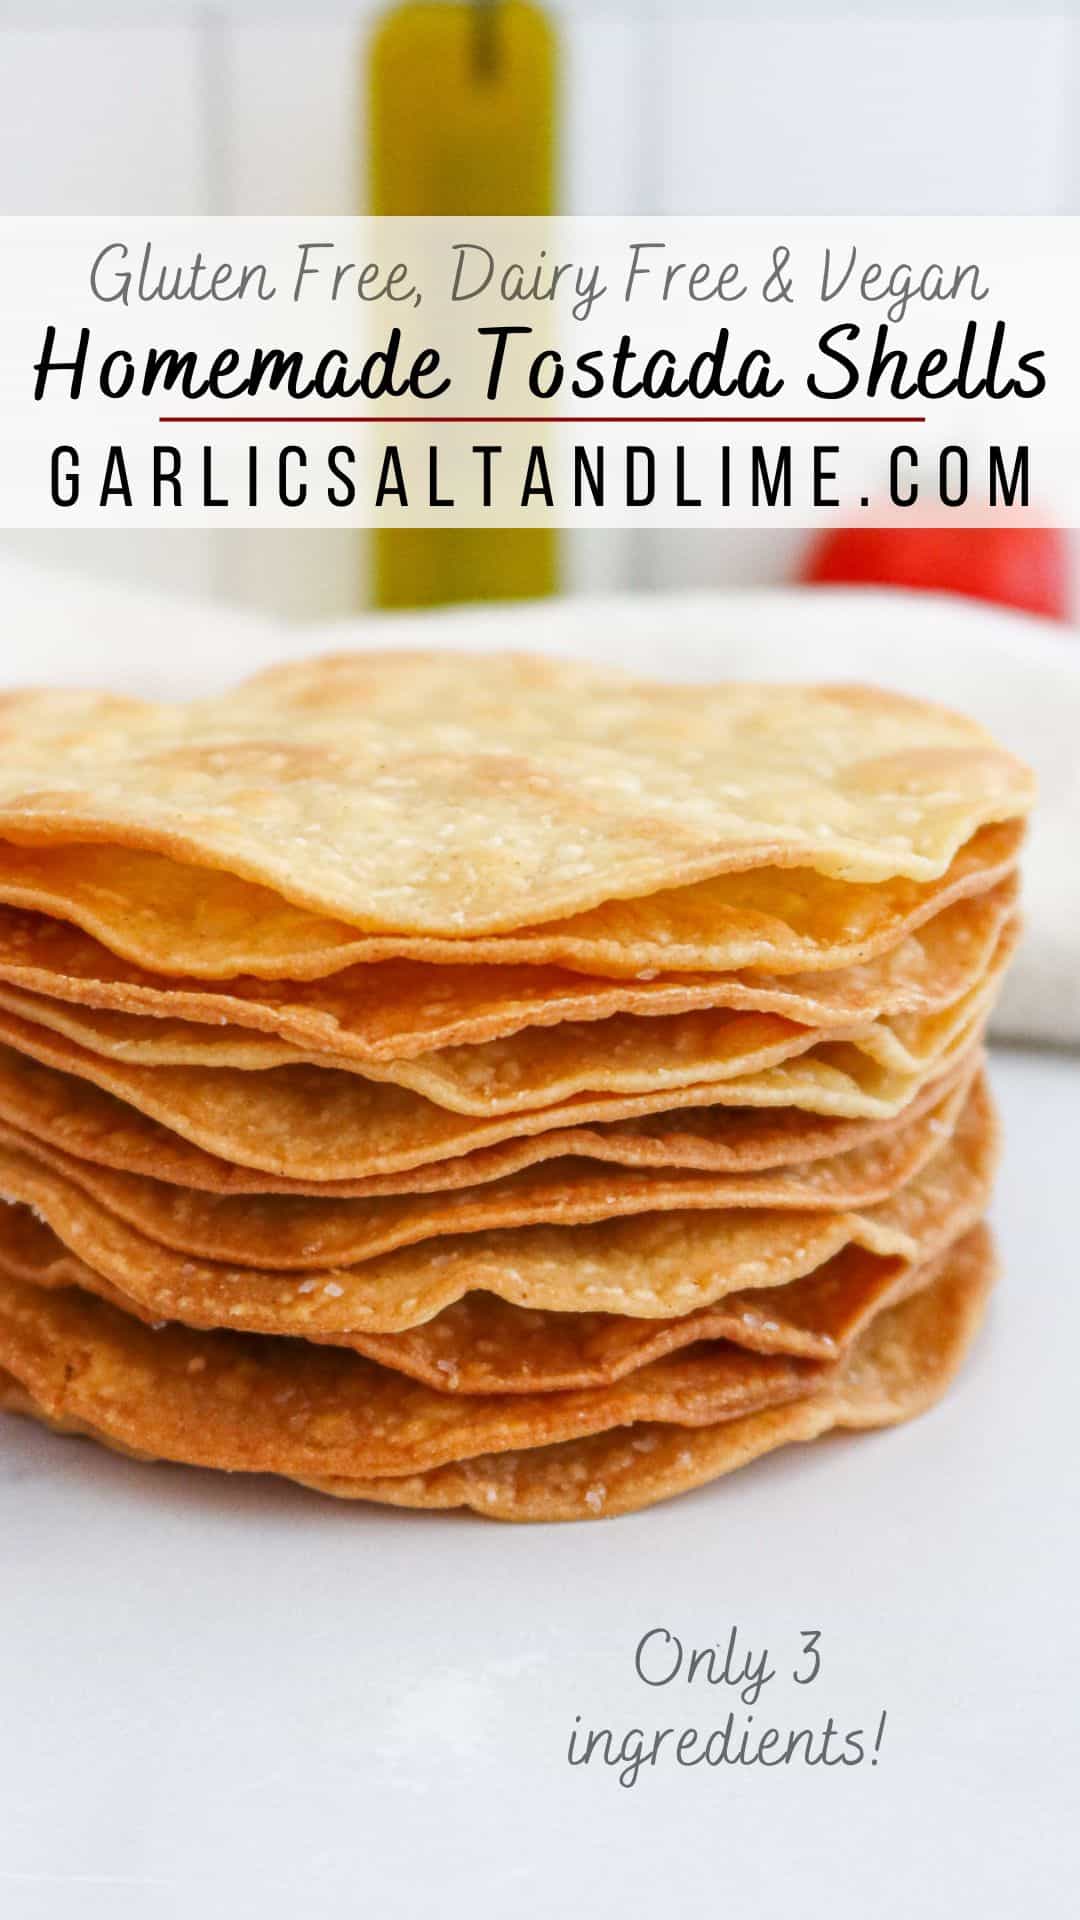 Stack of tostada shells with text overlay for Pinterest.